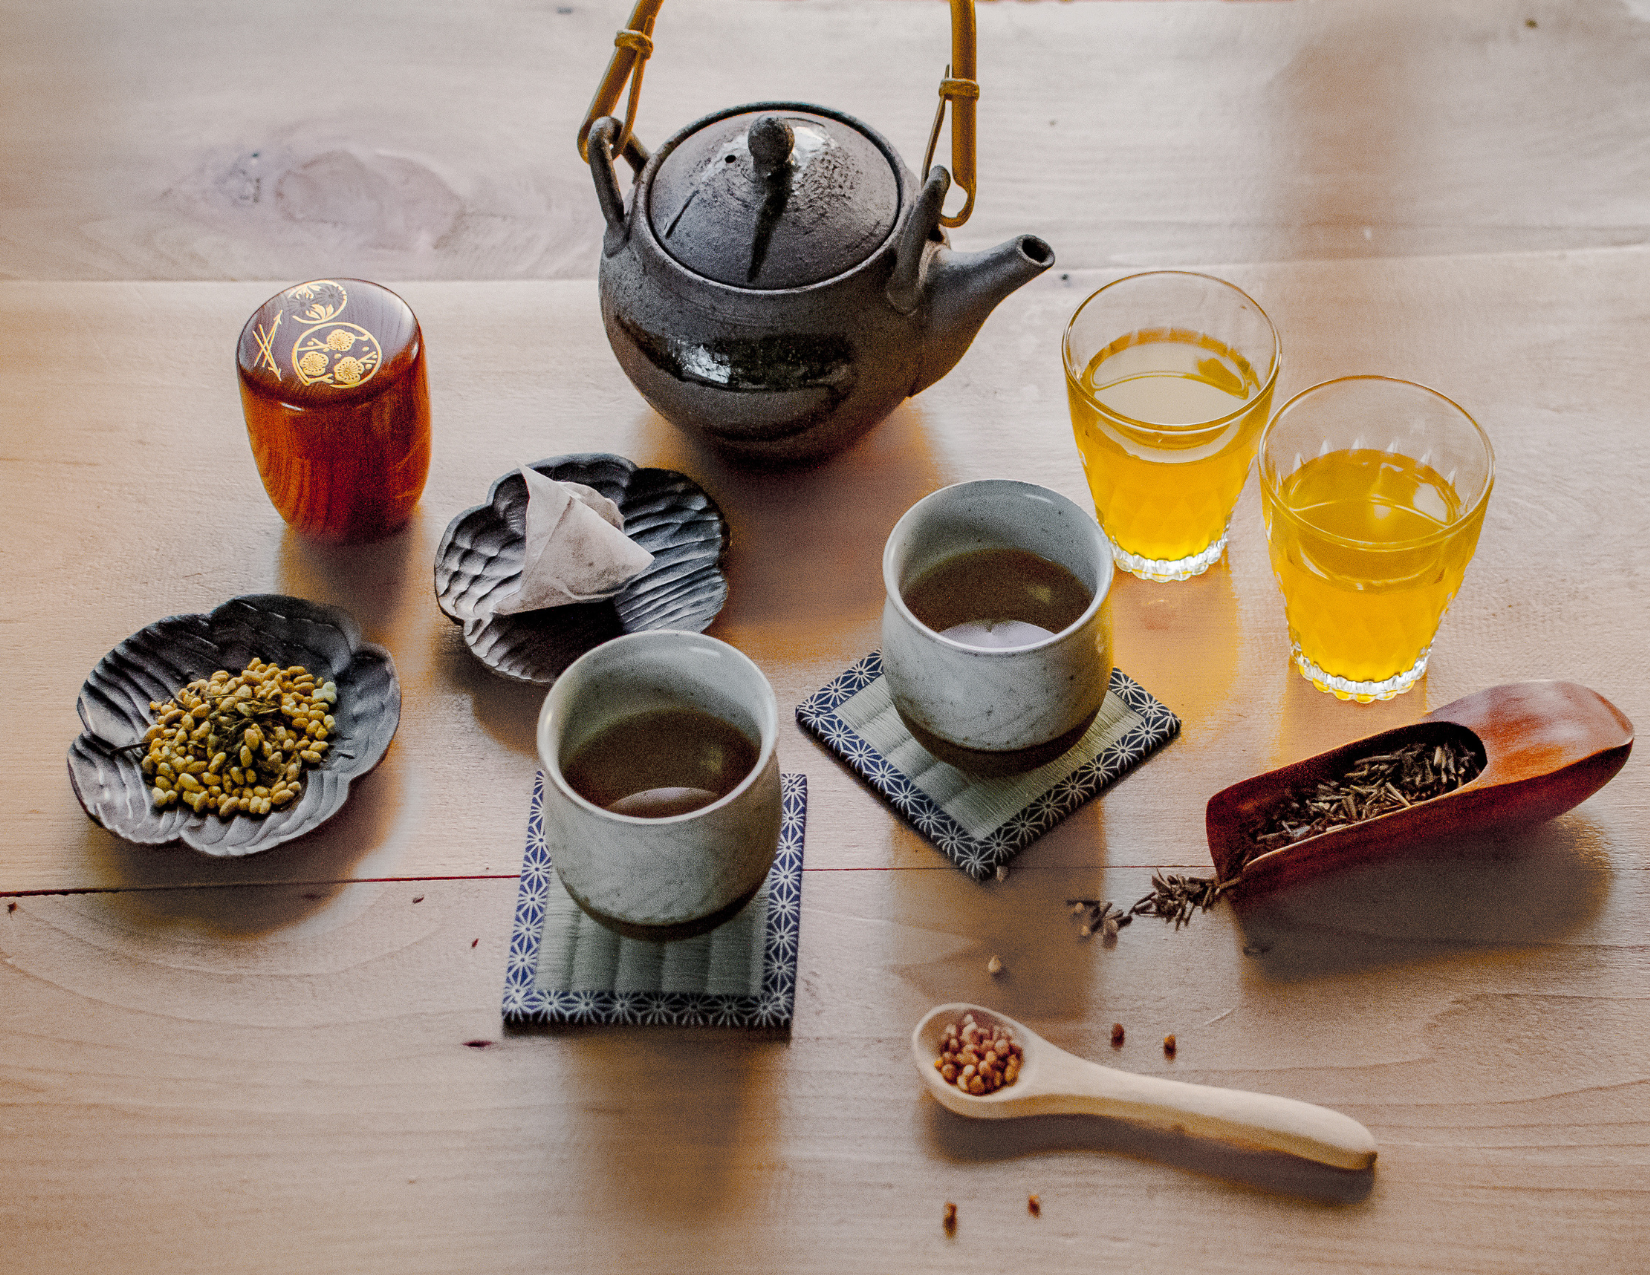 JAPANESE GREEN AND SPECIALTY TEAS: “Ryu” Care Package